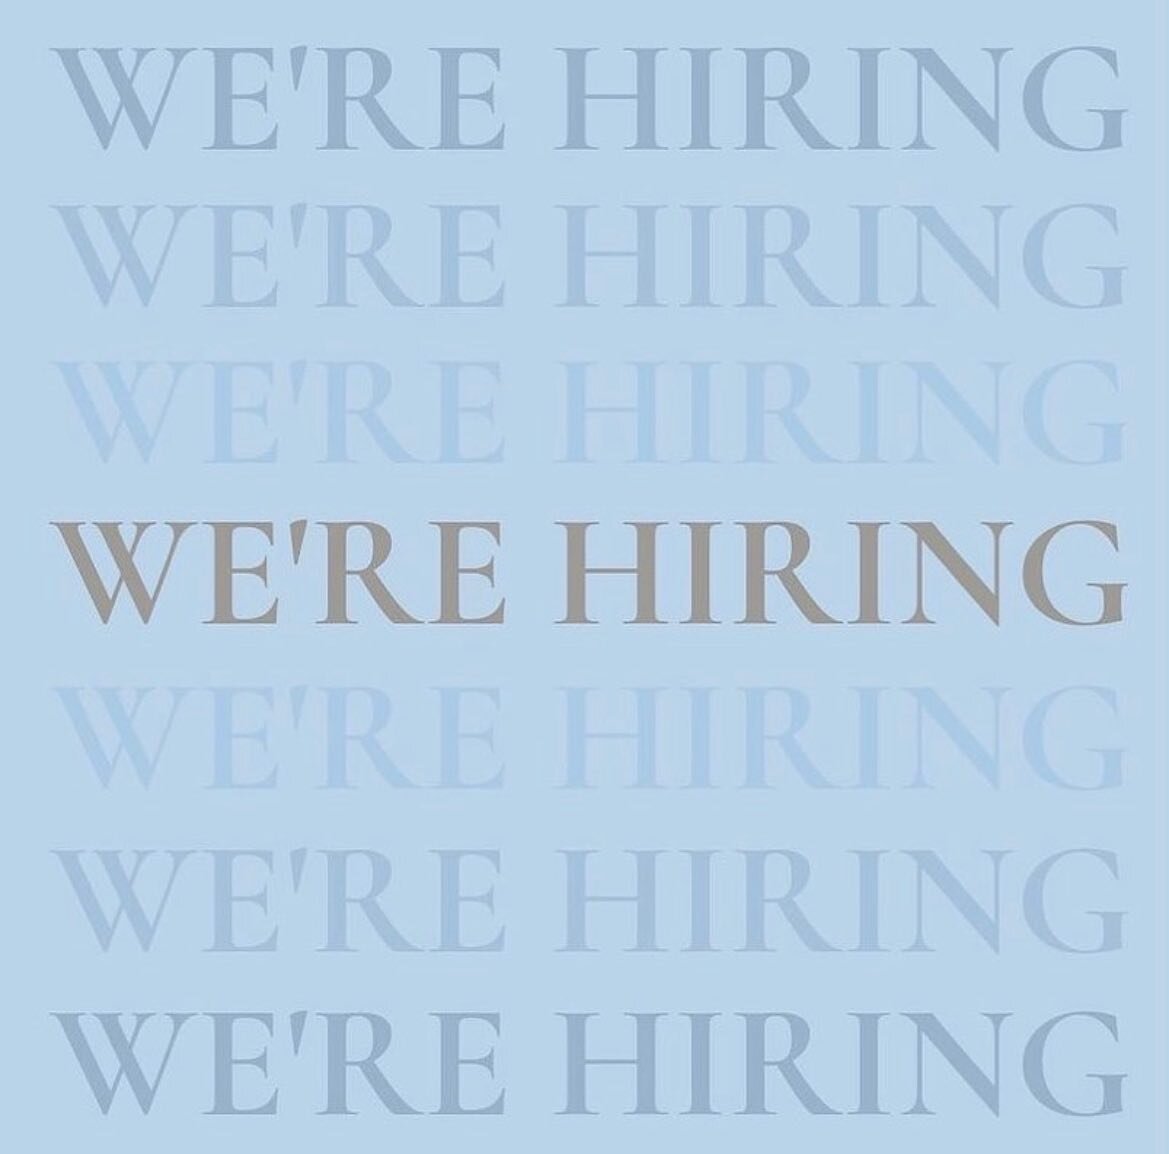 Our bad ass team is expanding! Do you want to work at the beach, live at the beach, eat at the beach, design beach houses and aren't a beach? Send us your resume, we'd love to talk to you. 🌴
www.leahmullerinteriors.com/careers